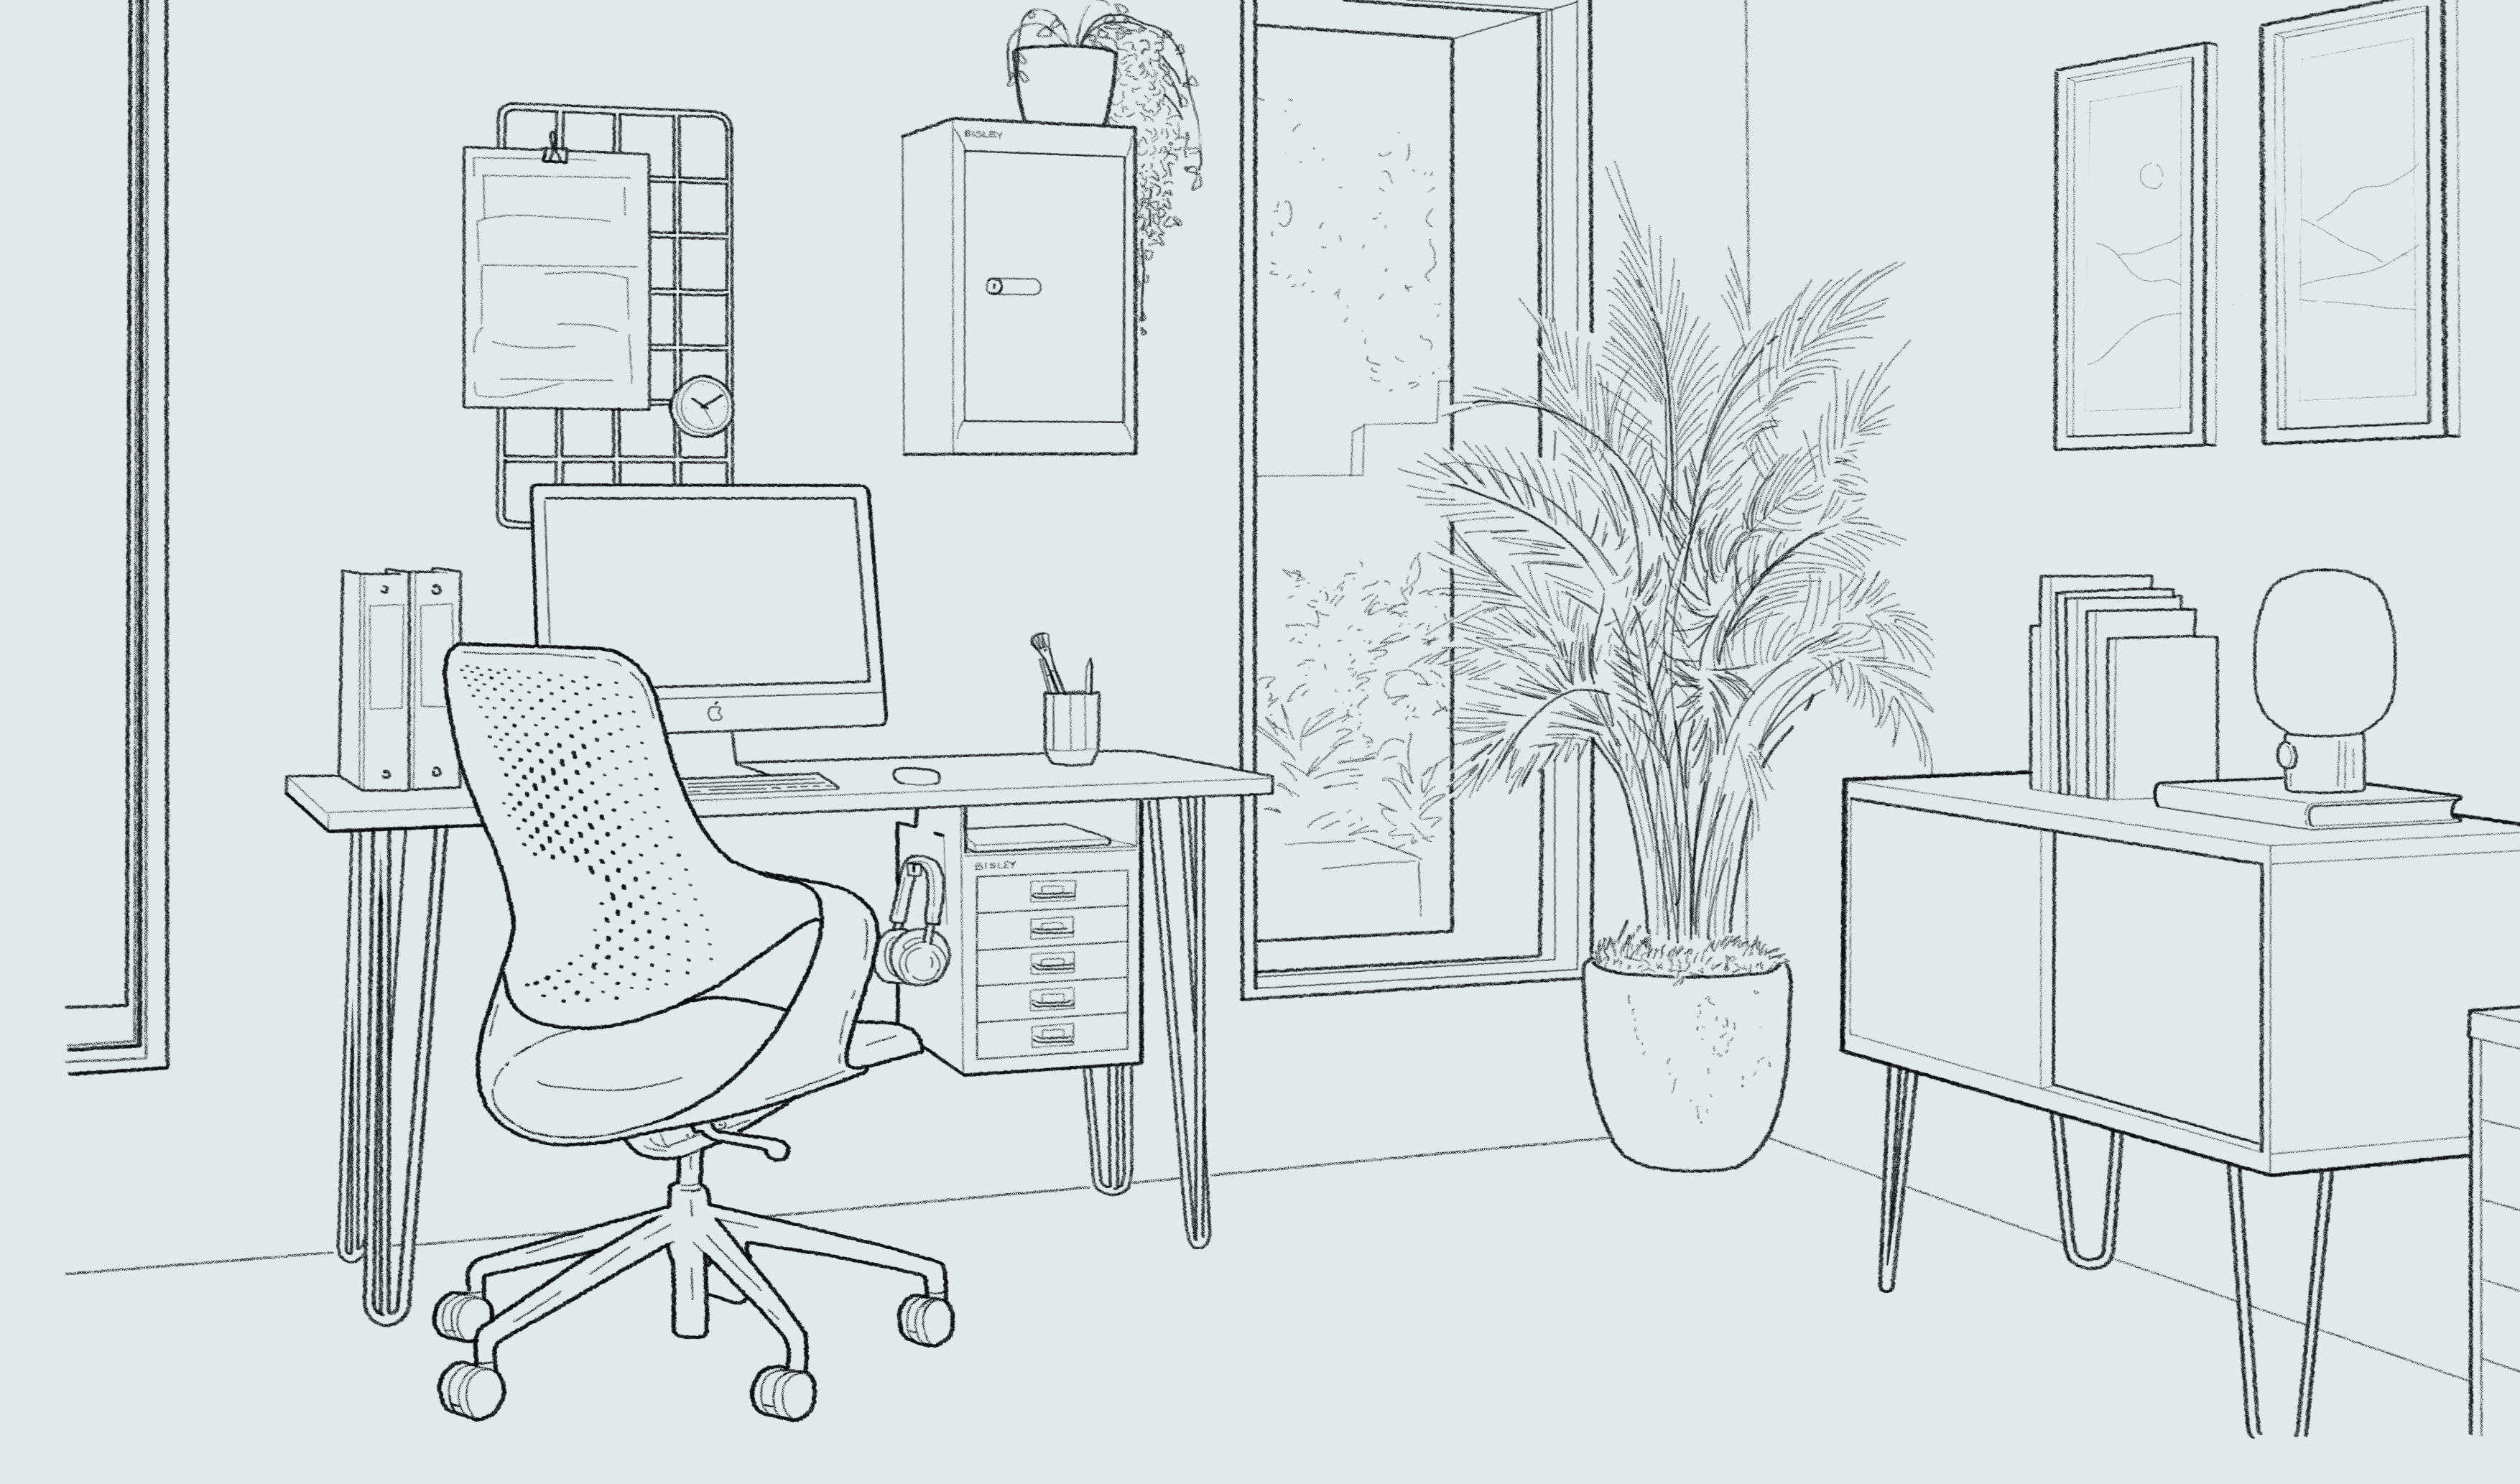 A pencil sketch of a Home in an office